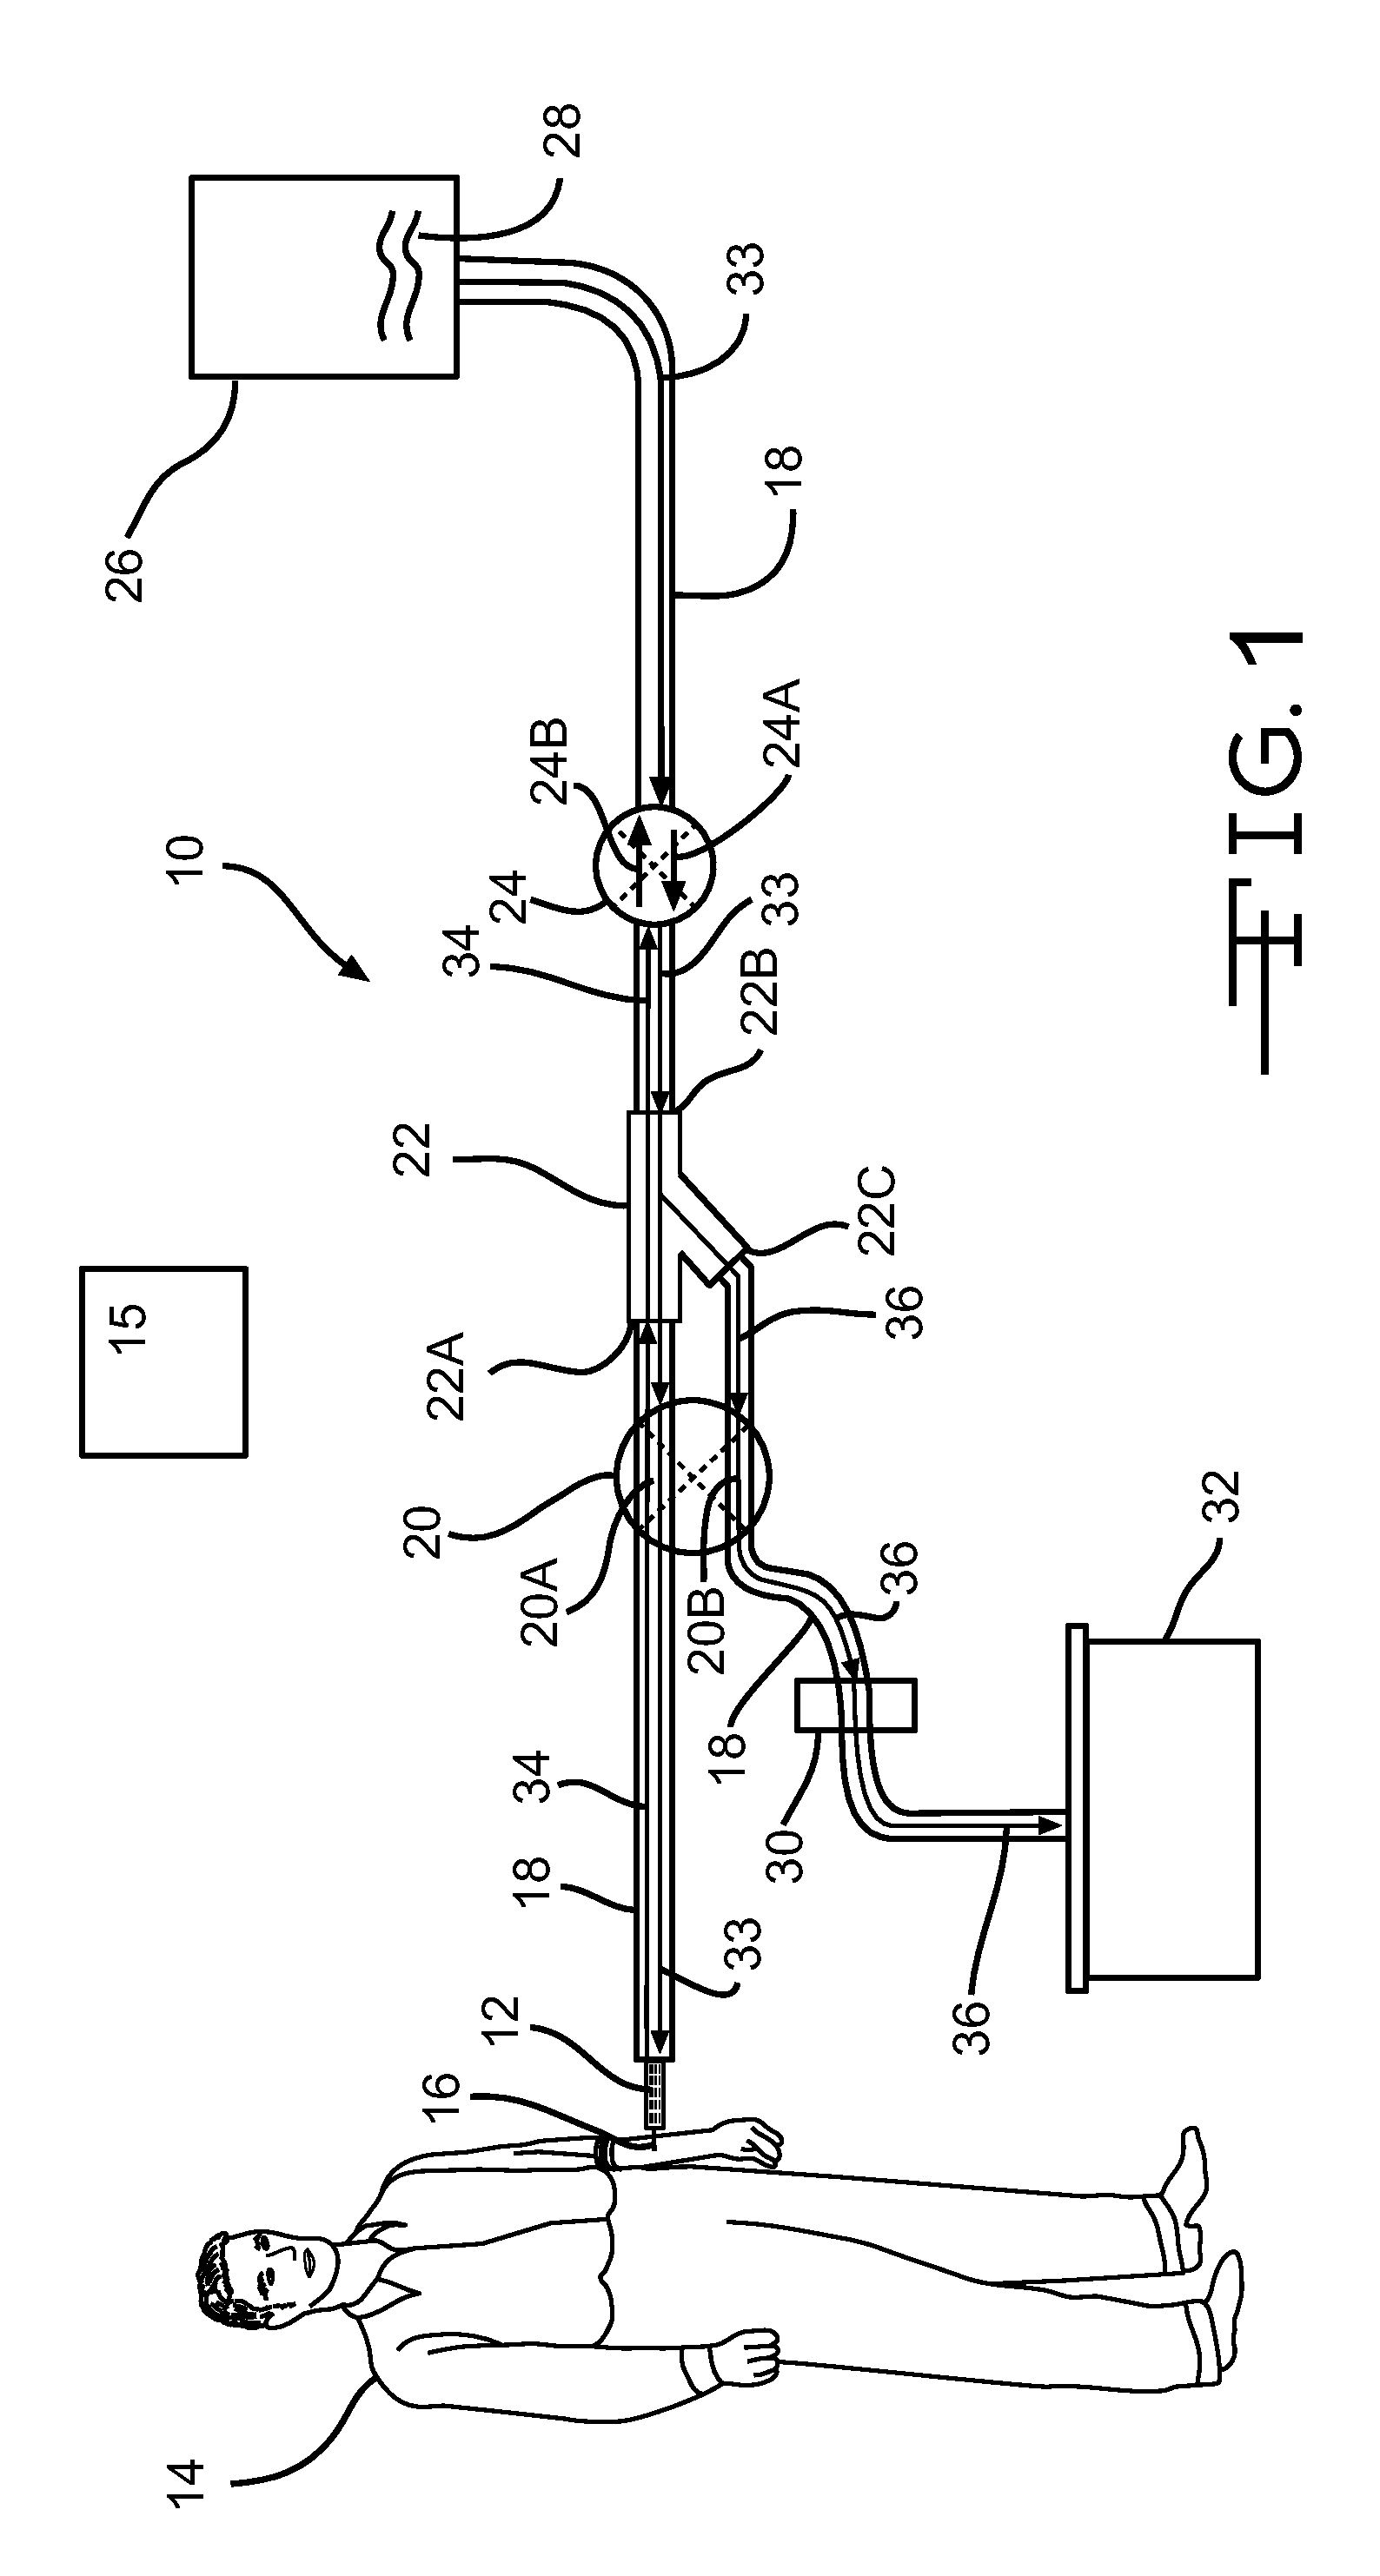 Automated blood sampling system and method